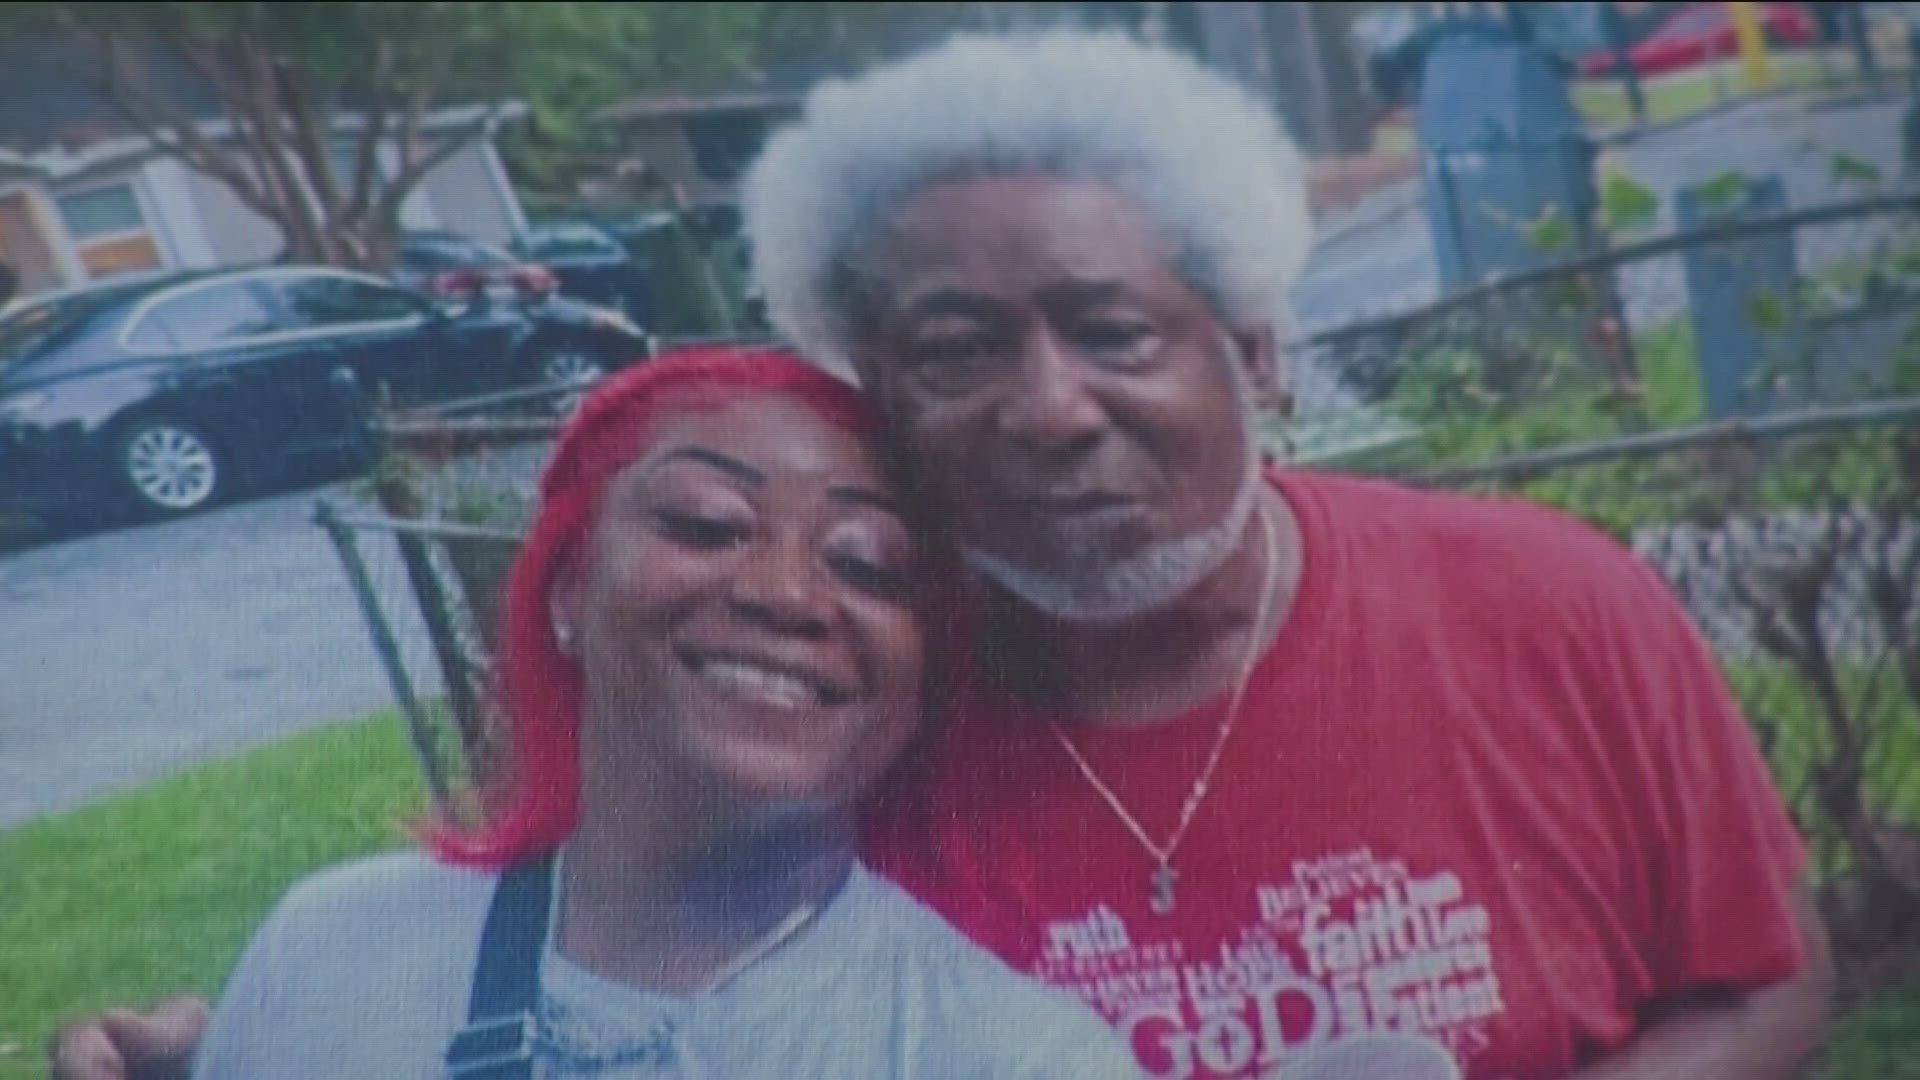 Attorneys say the family of Johnny Hollman plans to file a civil rights lawsuit against the City of Atlanta and a now-fired police officer in the case.